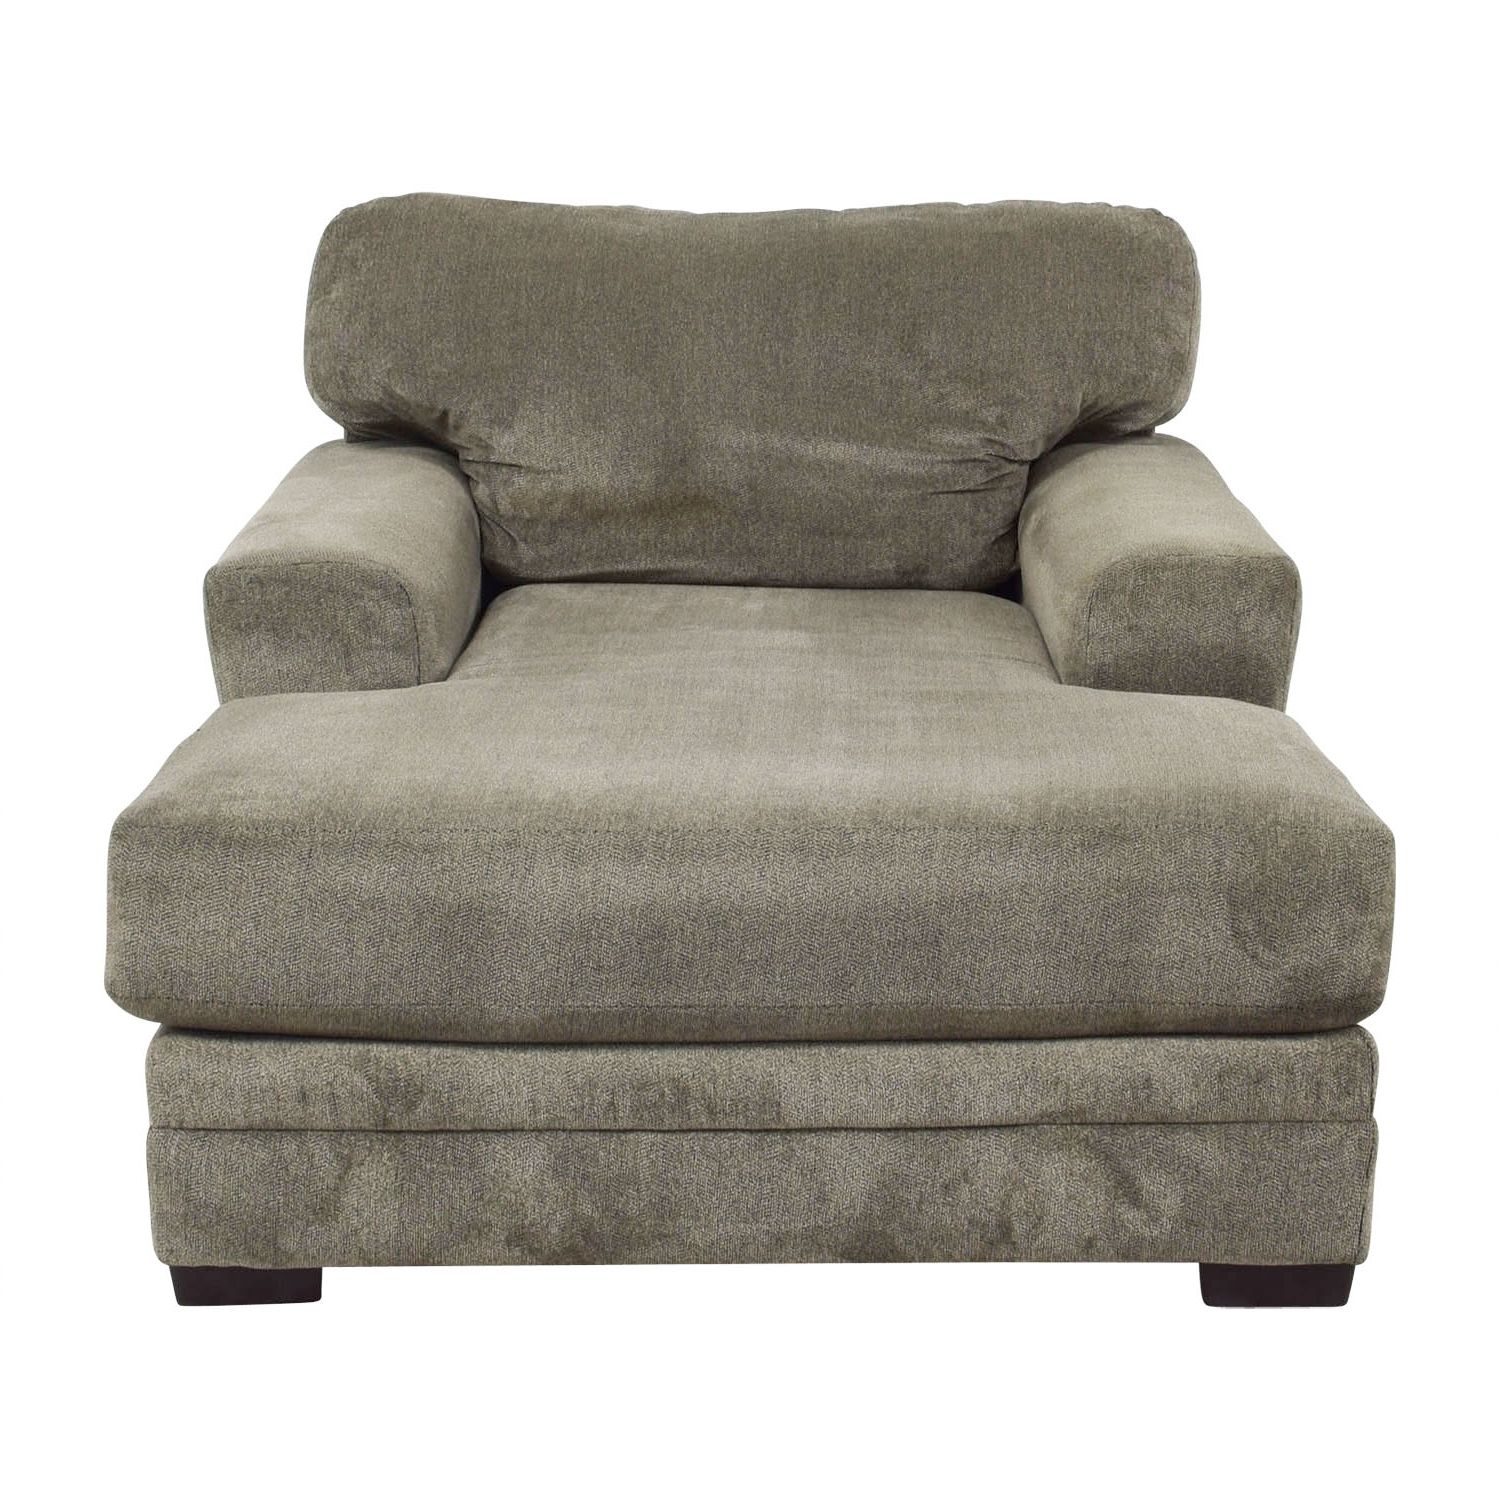 [%81% Off – Bob's Furniture Bob's Furniture Grey Chaise Lounge / Sofas Regarding Most Up To Date Bobs Furniture Chaises|bobs Furniture Chaises In Most Recently Released 81% Off – Bob's Furniture Bob's Furniture Grey Chaise Lounge / Sofas|latest Bobs Furniture Chaises For 81% Off – Bob's Furniture Bob's Furniture Grey Chaise Lounge / Sofas|widely Used 81% Off – Bob's Furniture Bob's Furniture Grey Chaise Lounge / Sofas With Regard To Bobs Furniture Chaises%] (Photo 7 of 15)